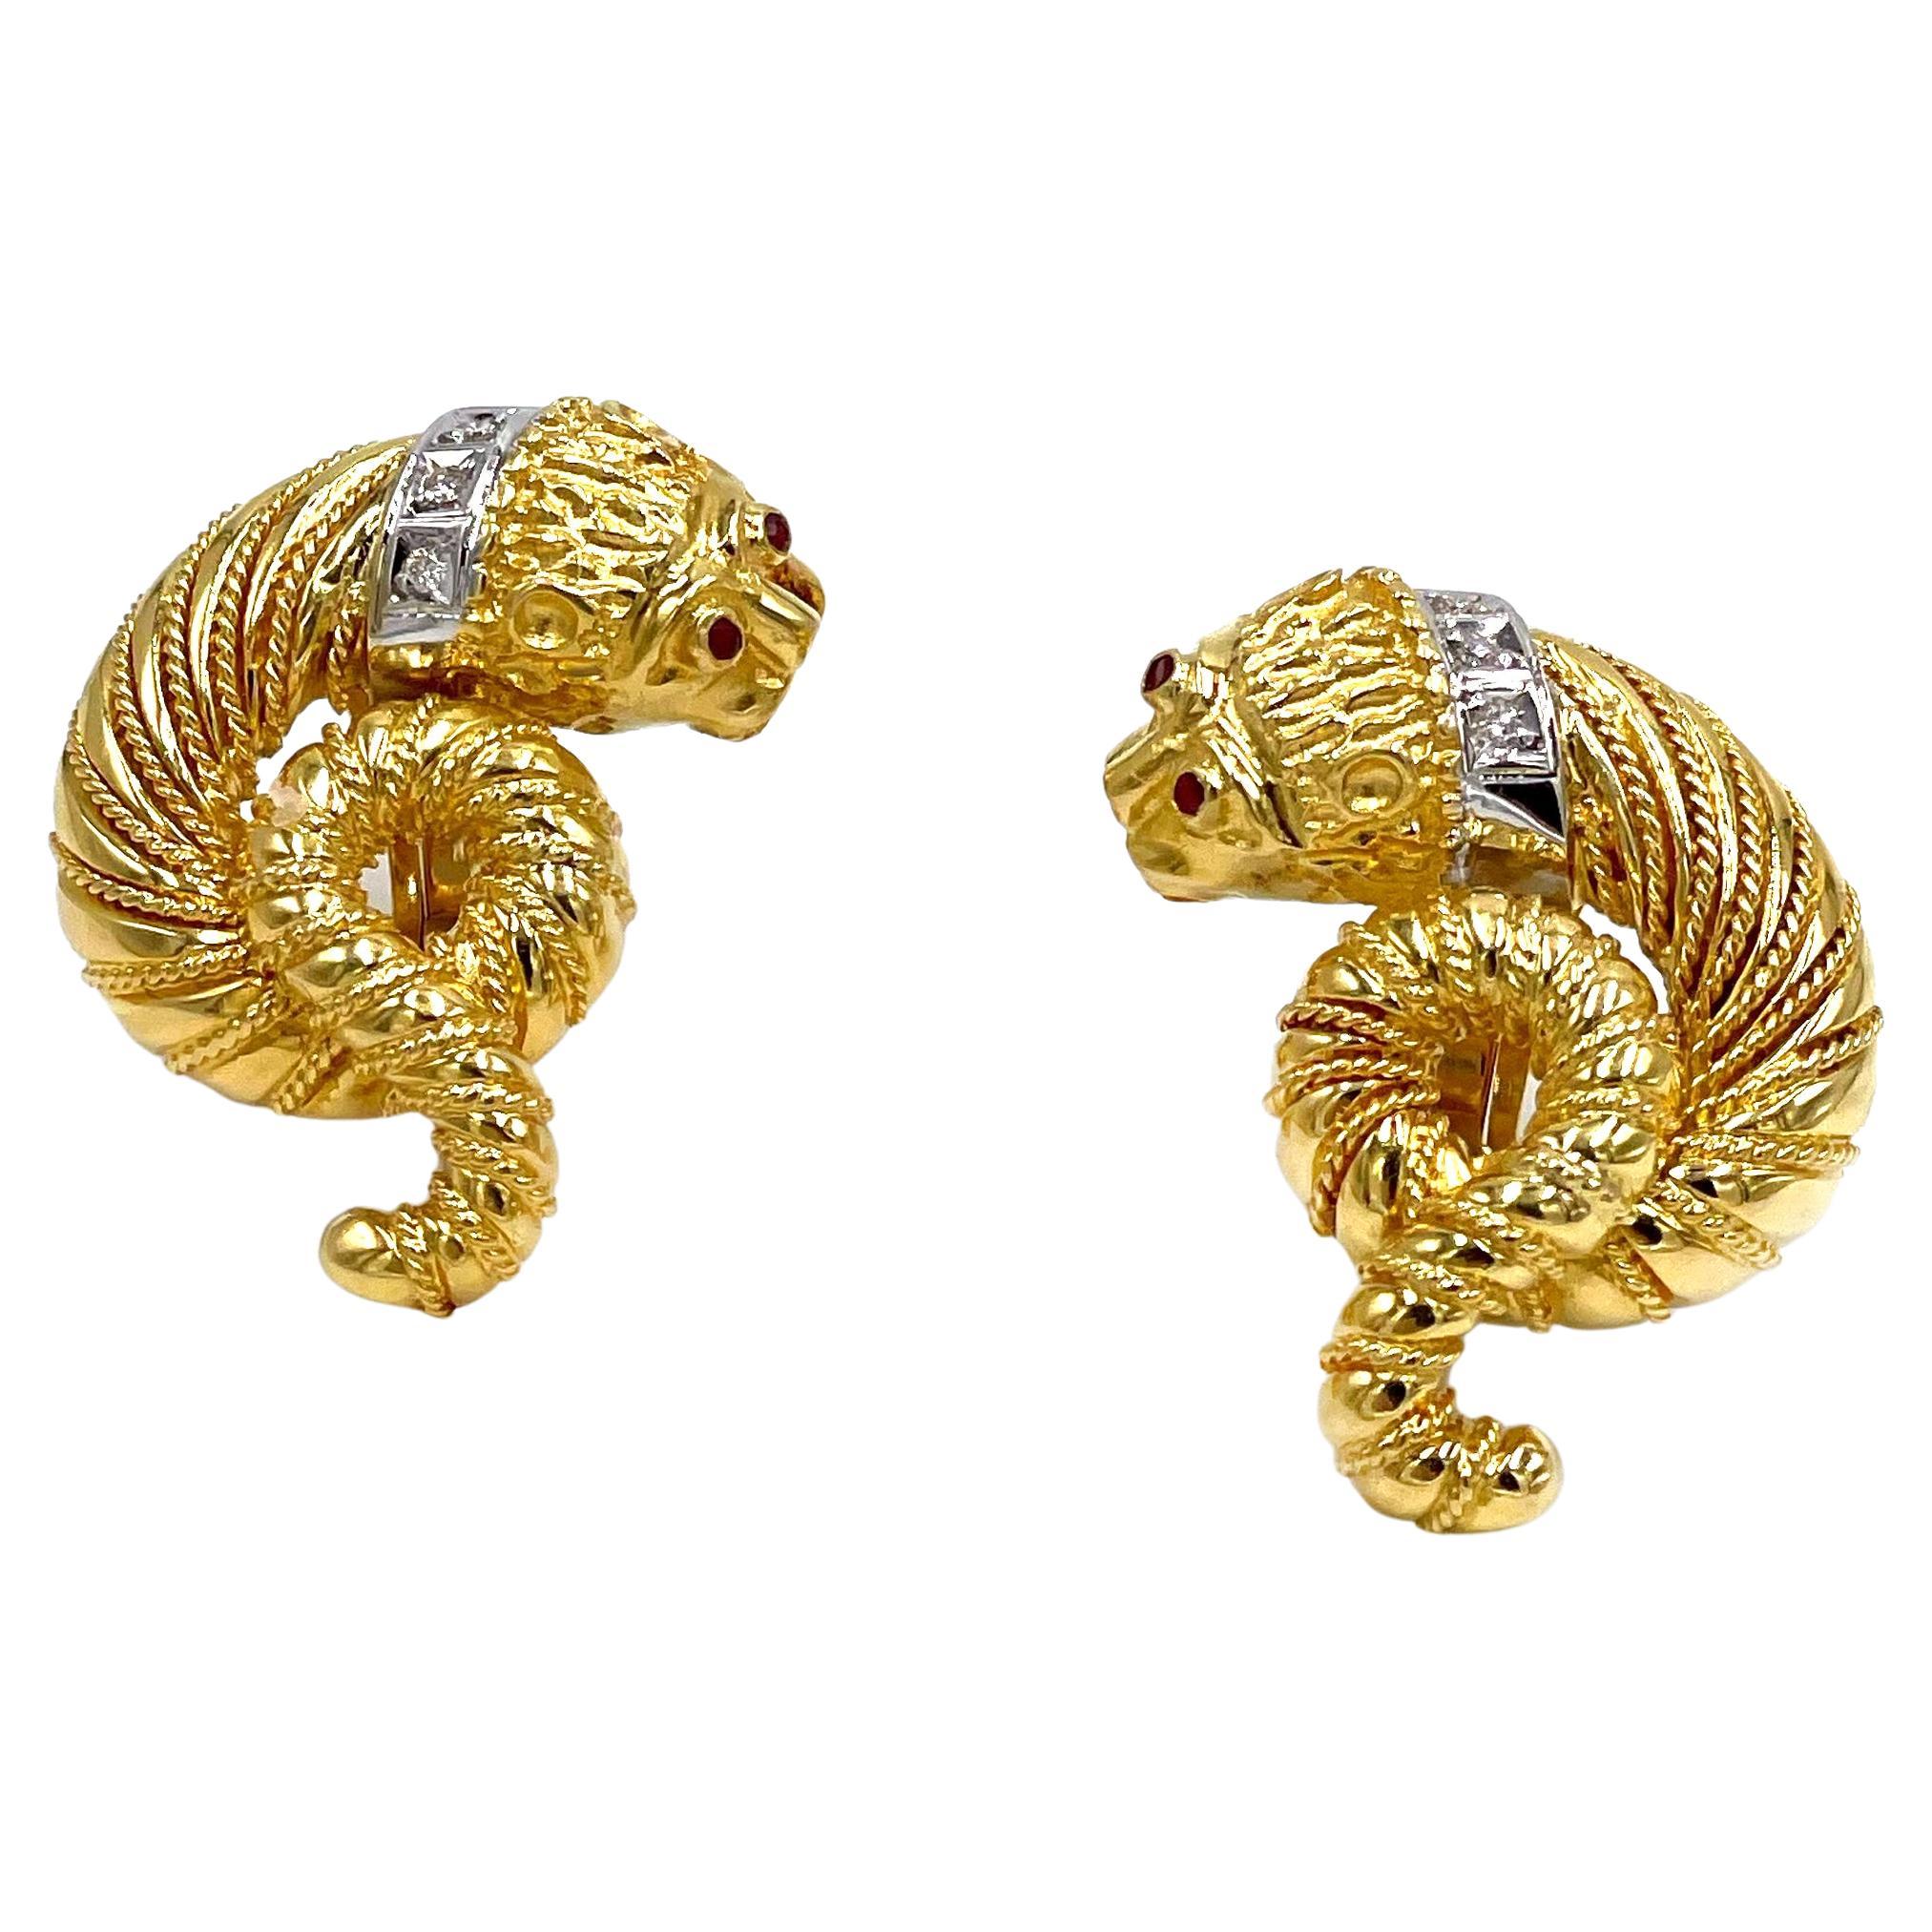 18K Yellow Gold Lion Earrings with Diamonds and Ruby